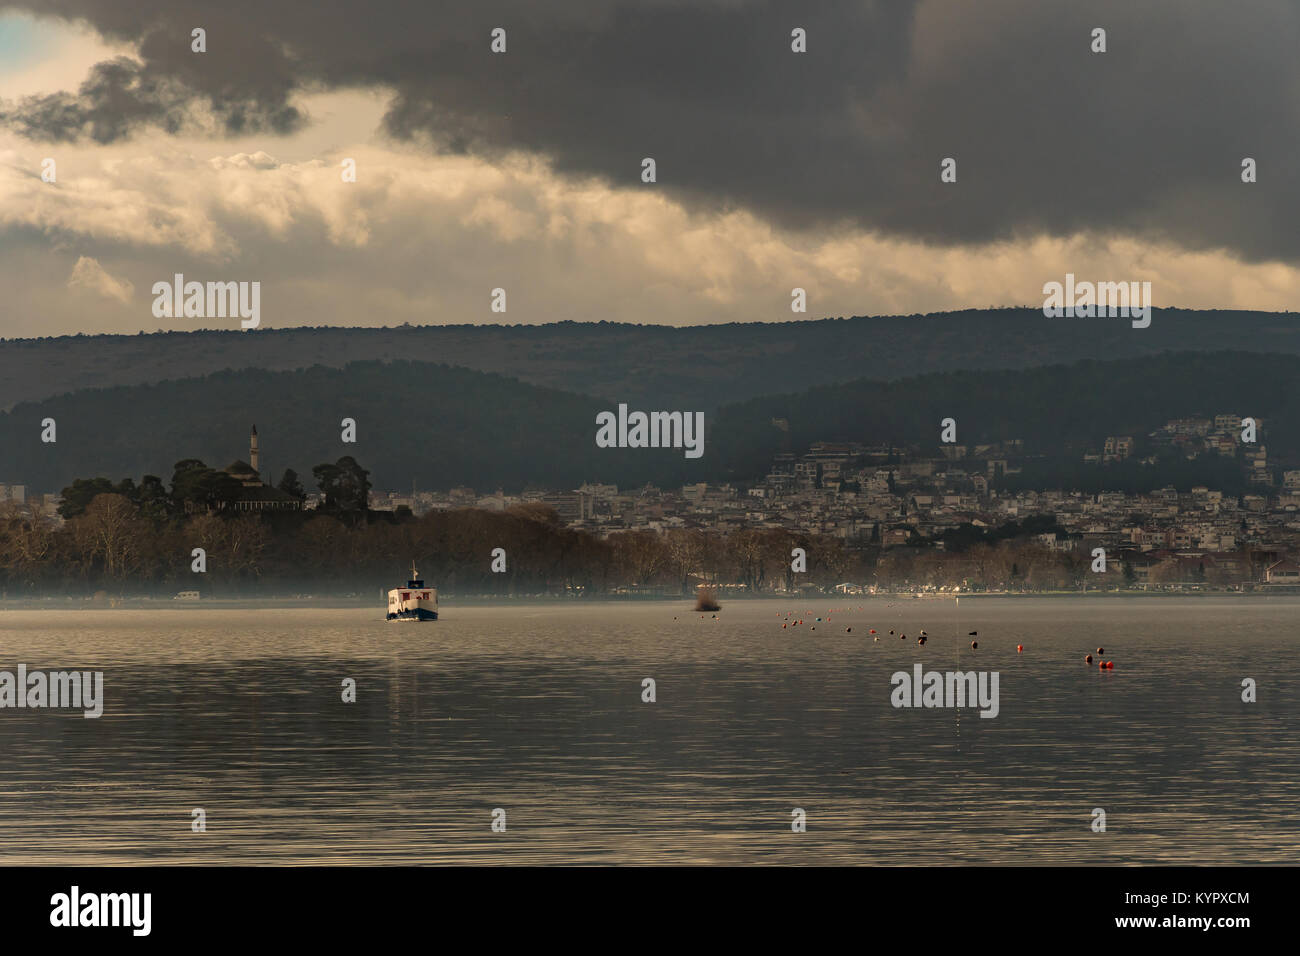 View of Ioannina city and the castles' s minaret from the pamvotida lake in Ioannina Greece Stock Photo